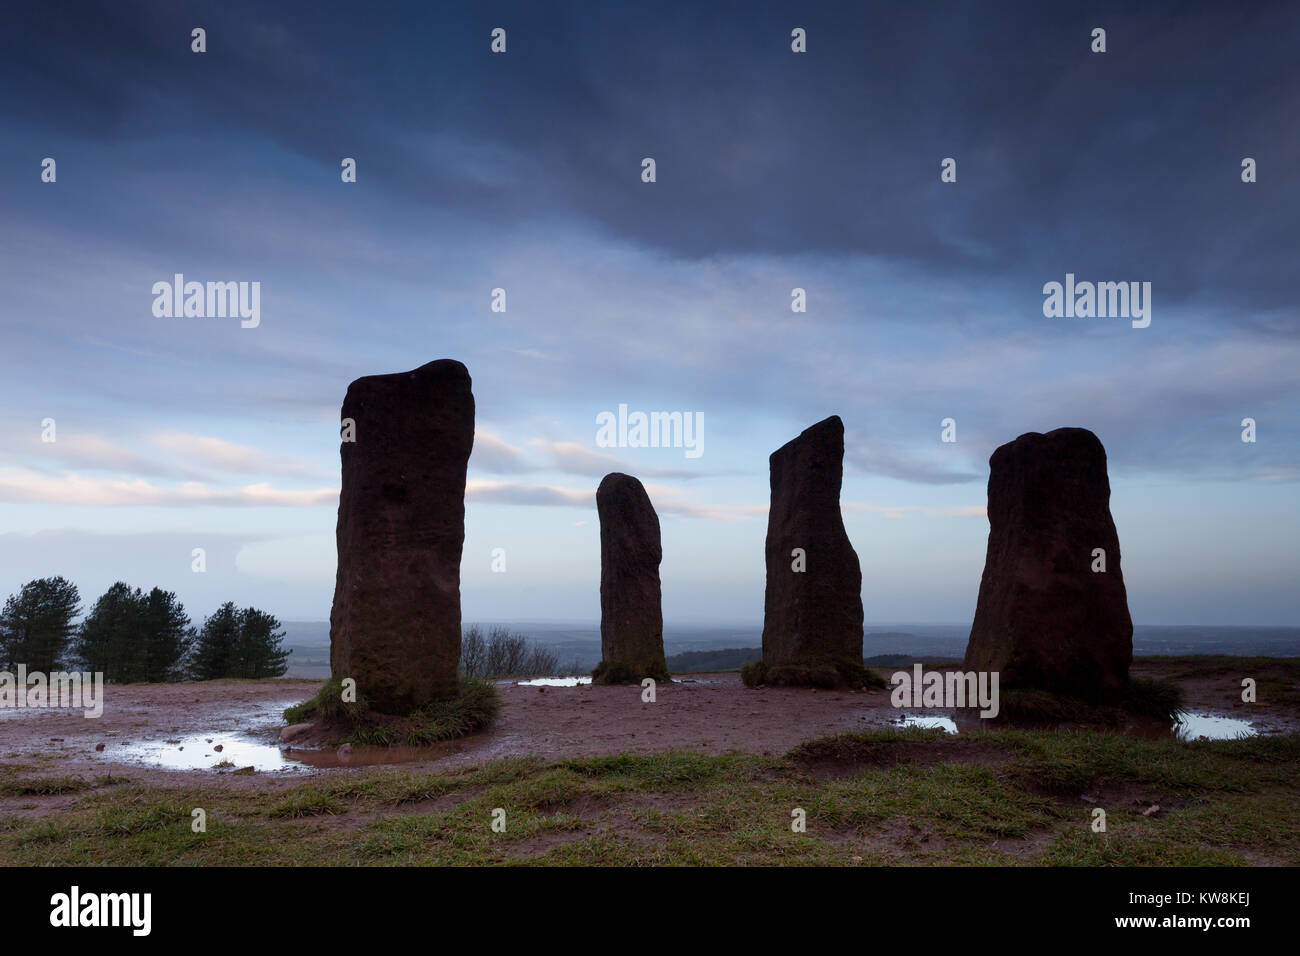 Clent, Worcestershire, UK. 31st December, 2017. On the last day of 2017, a gloomy dawn sky is pictured over the four stones in the Clent Hills, just southwest of Birmingham and the Black Country, UK.  Peter Lopeman/Alamy Live News Stock Photo